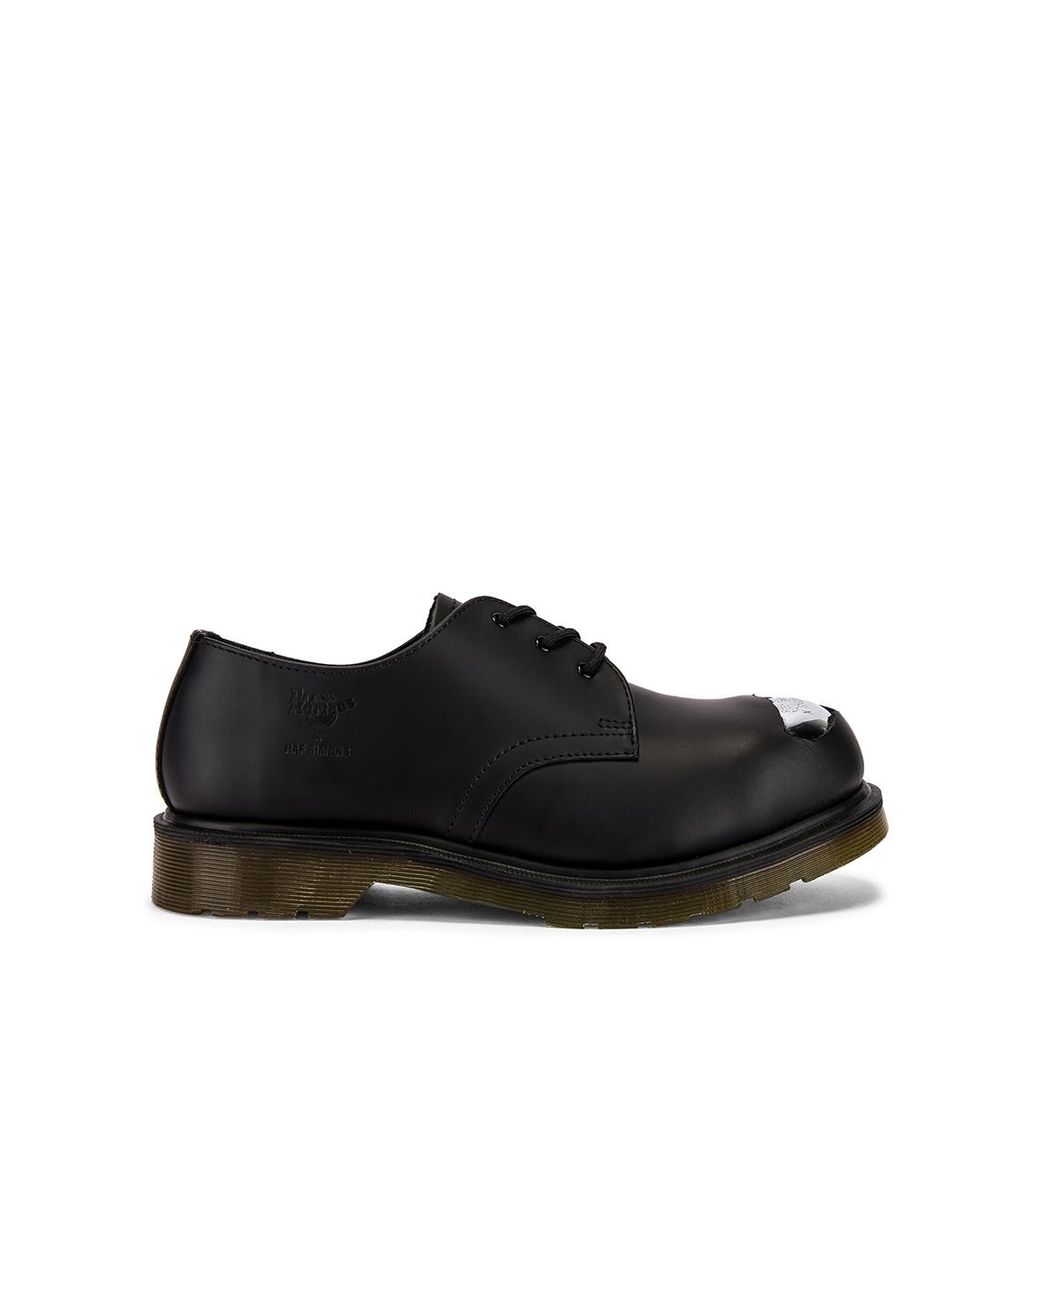 Raf Simons X Dr. Martens Cut Out Steel Toe Shoes in Black for Men | Lyst